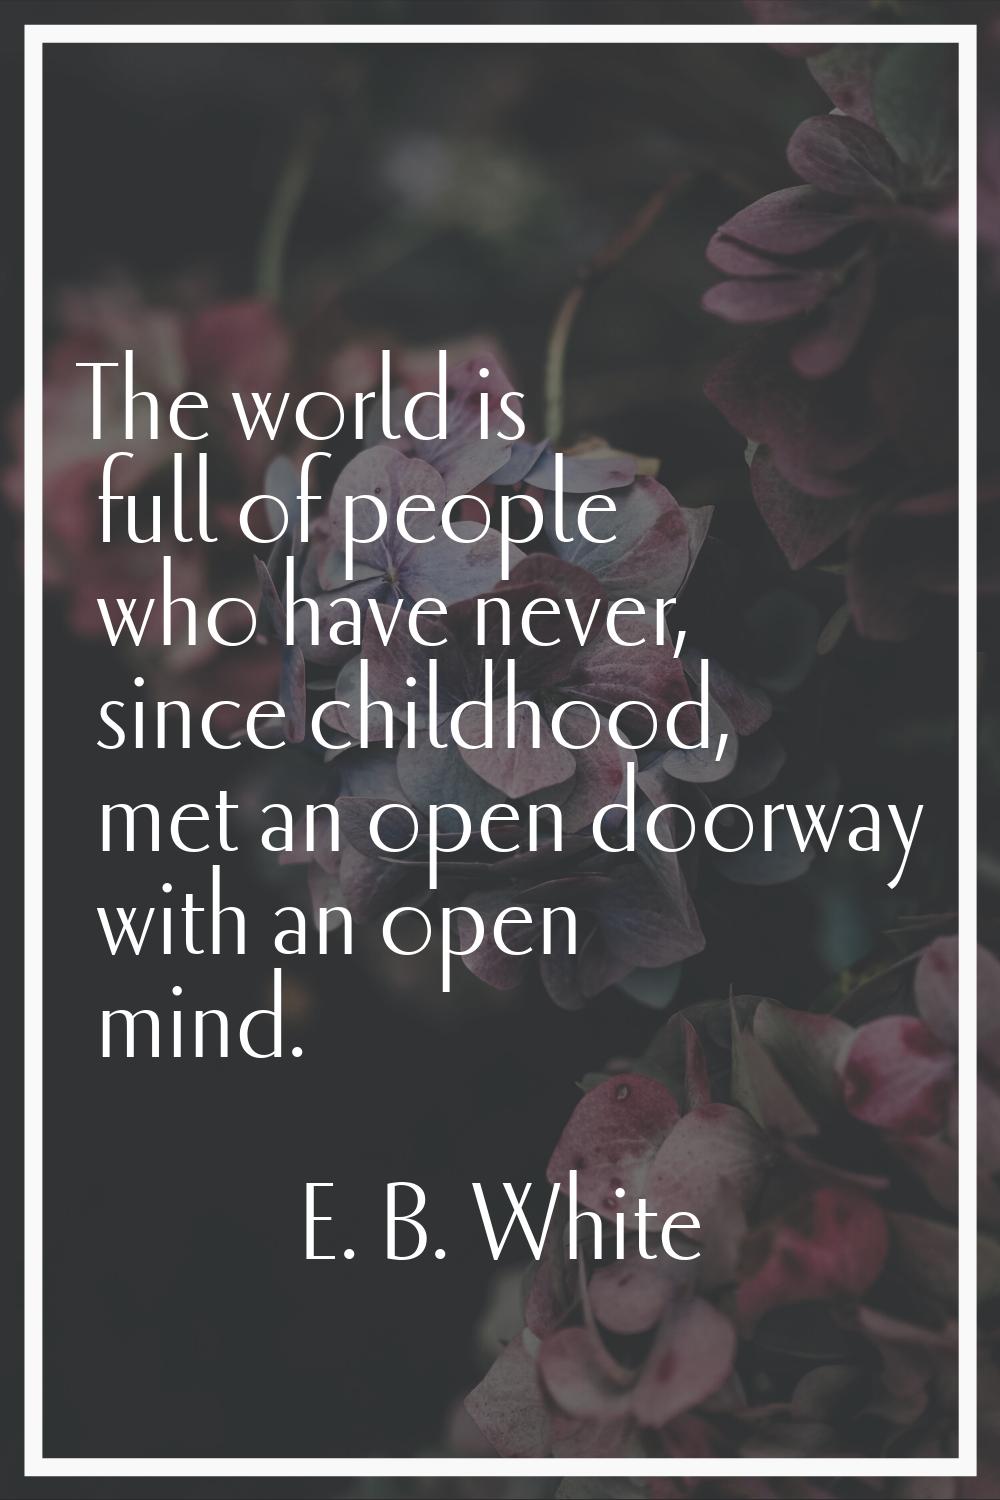 The world is full of people who have never, since childhood, met an open doorway with an open mind.